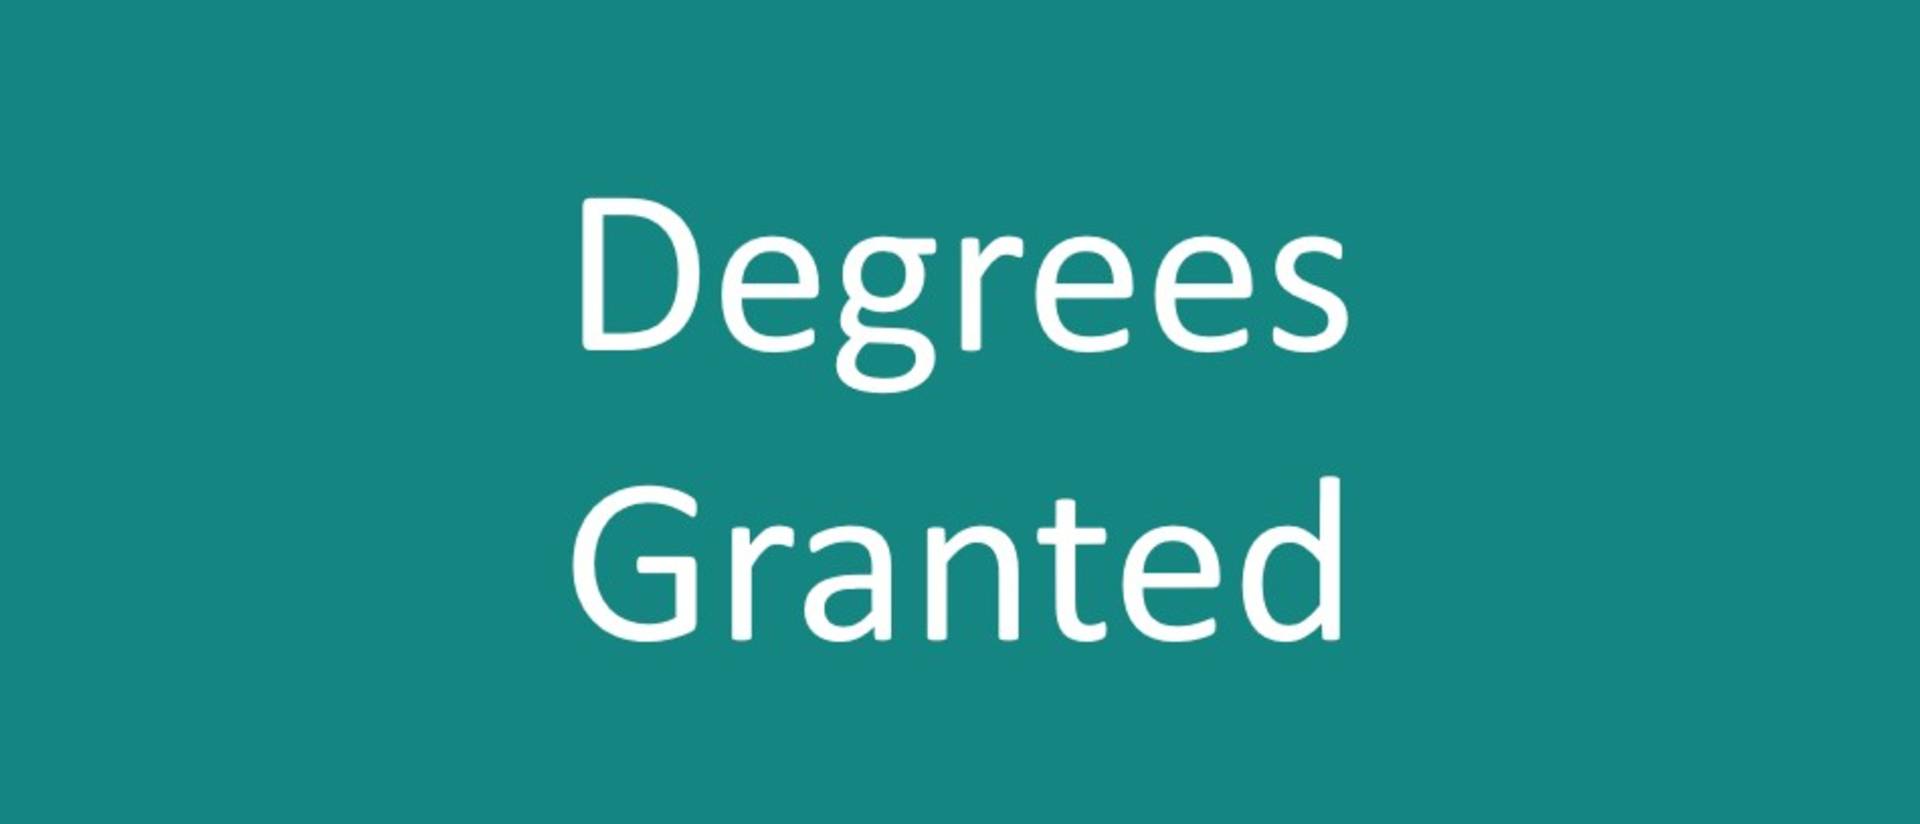 Degrees Granted